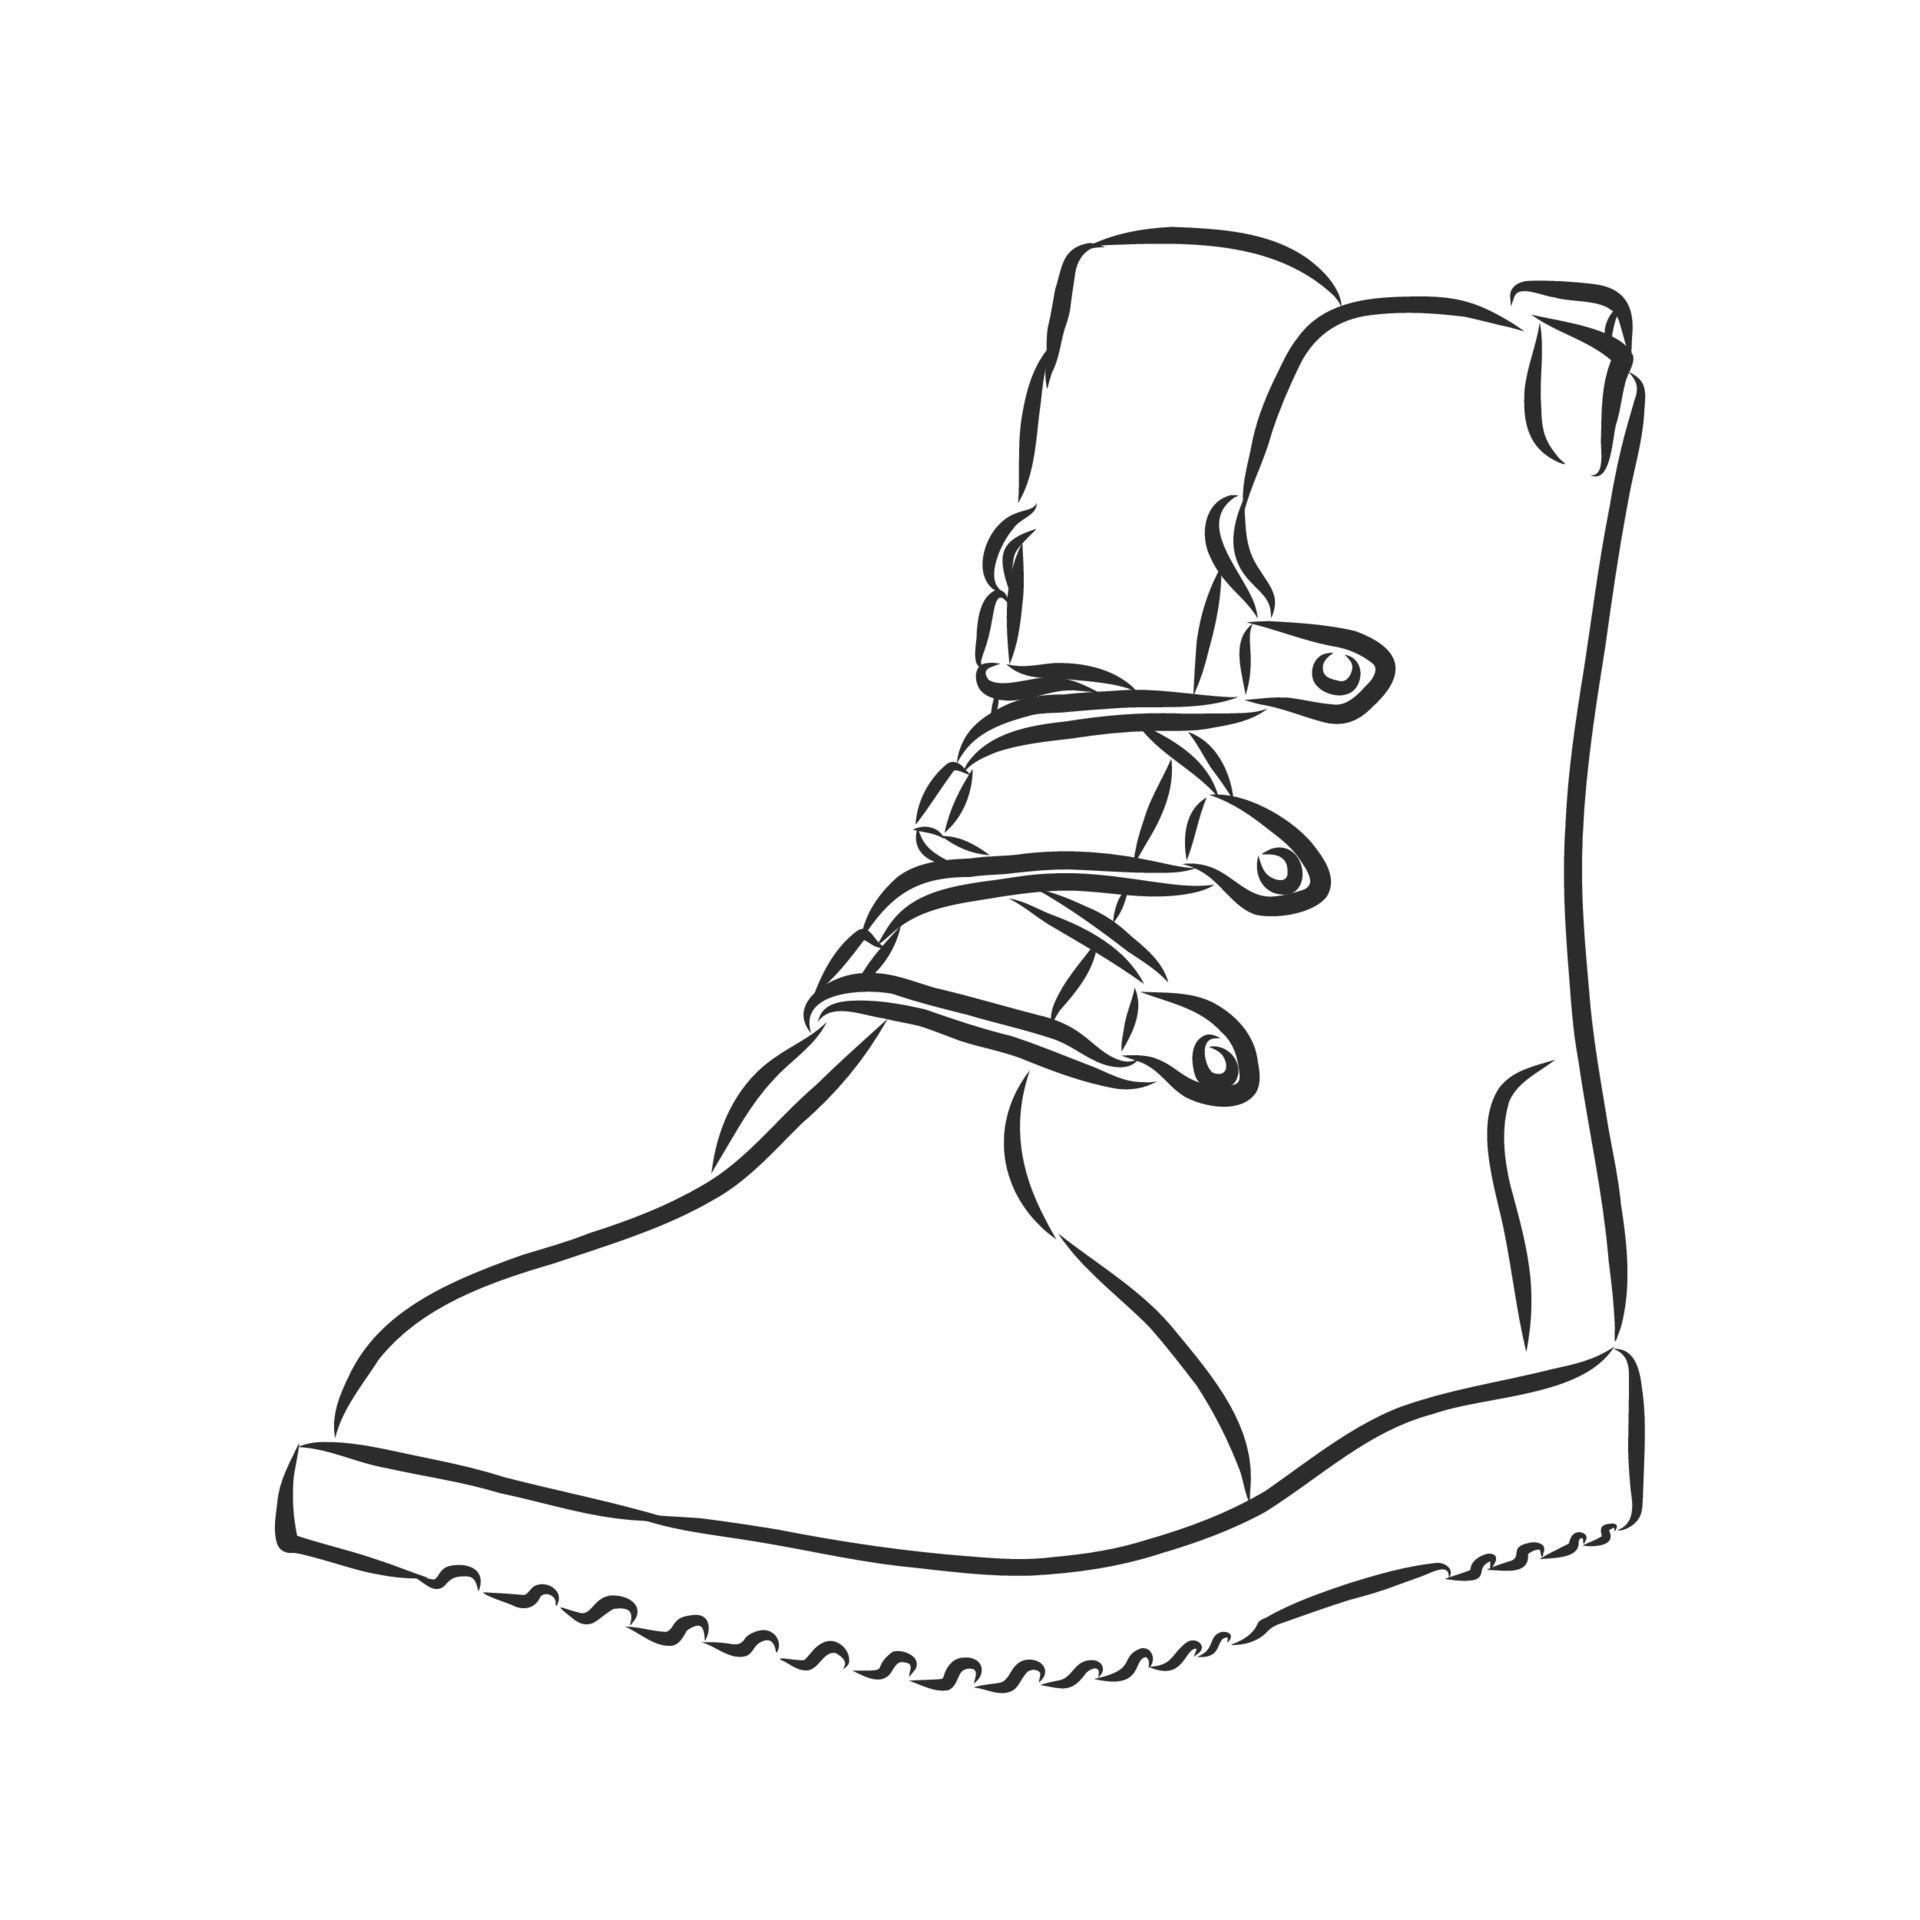 How to draw a Boot | Pencil sketch | step by step | by videos point -  YouTube